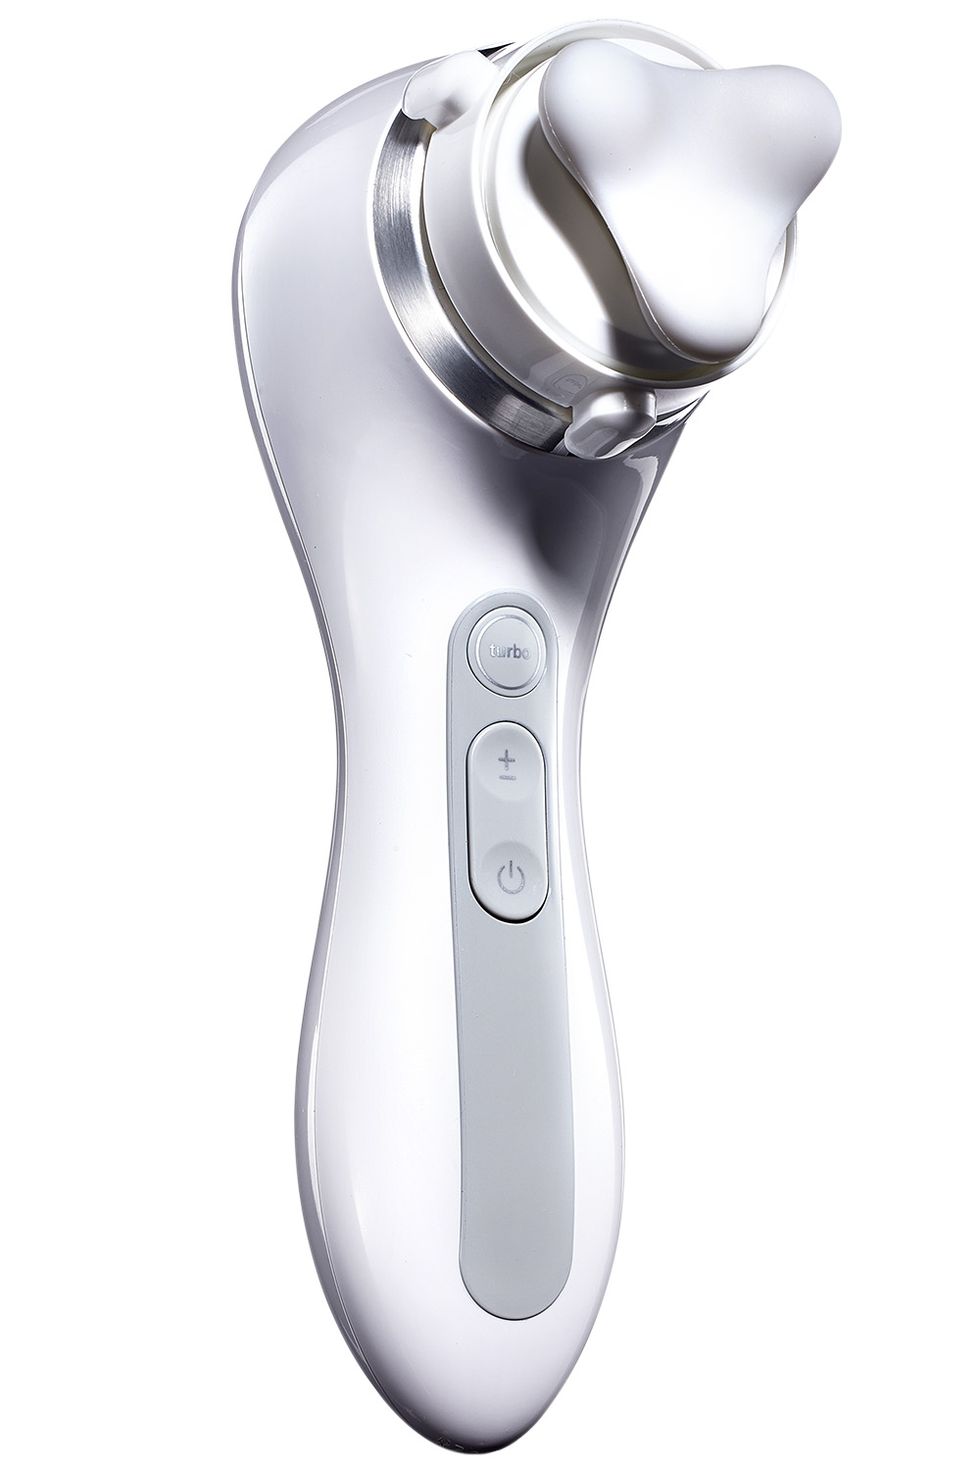 <p>Anti-aging serums,&nbsp;creams, and masks&nbsp;will penetrate&nbsp;better when you&nbsp;use them with the&nbsp;<a href="http://www.clarisonic.com/brush-heads/firming-massage-head-CL373.html" target="_blank" data-tracking-id="recirc-text-link">Clarisonic Smart&nbsp;Profile Firming&nbsp;Massage Head</a>&nbsp;($54), says Robb&nbsp;Akridge, a&nbsp;cofounder and&nbsp;president of&nbsp;Clarisonic.&nbsp;</p>